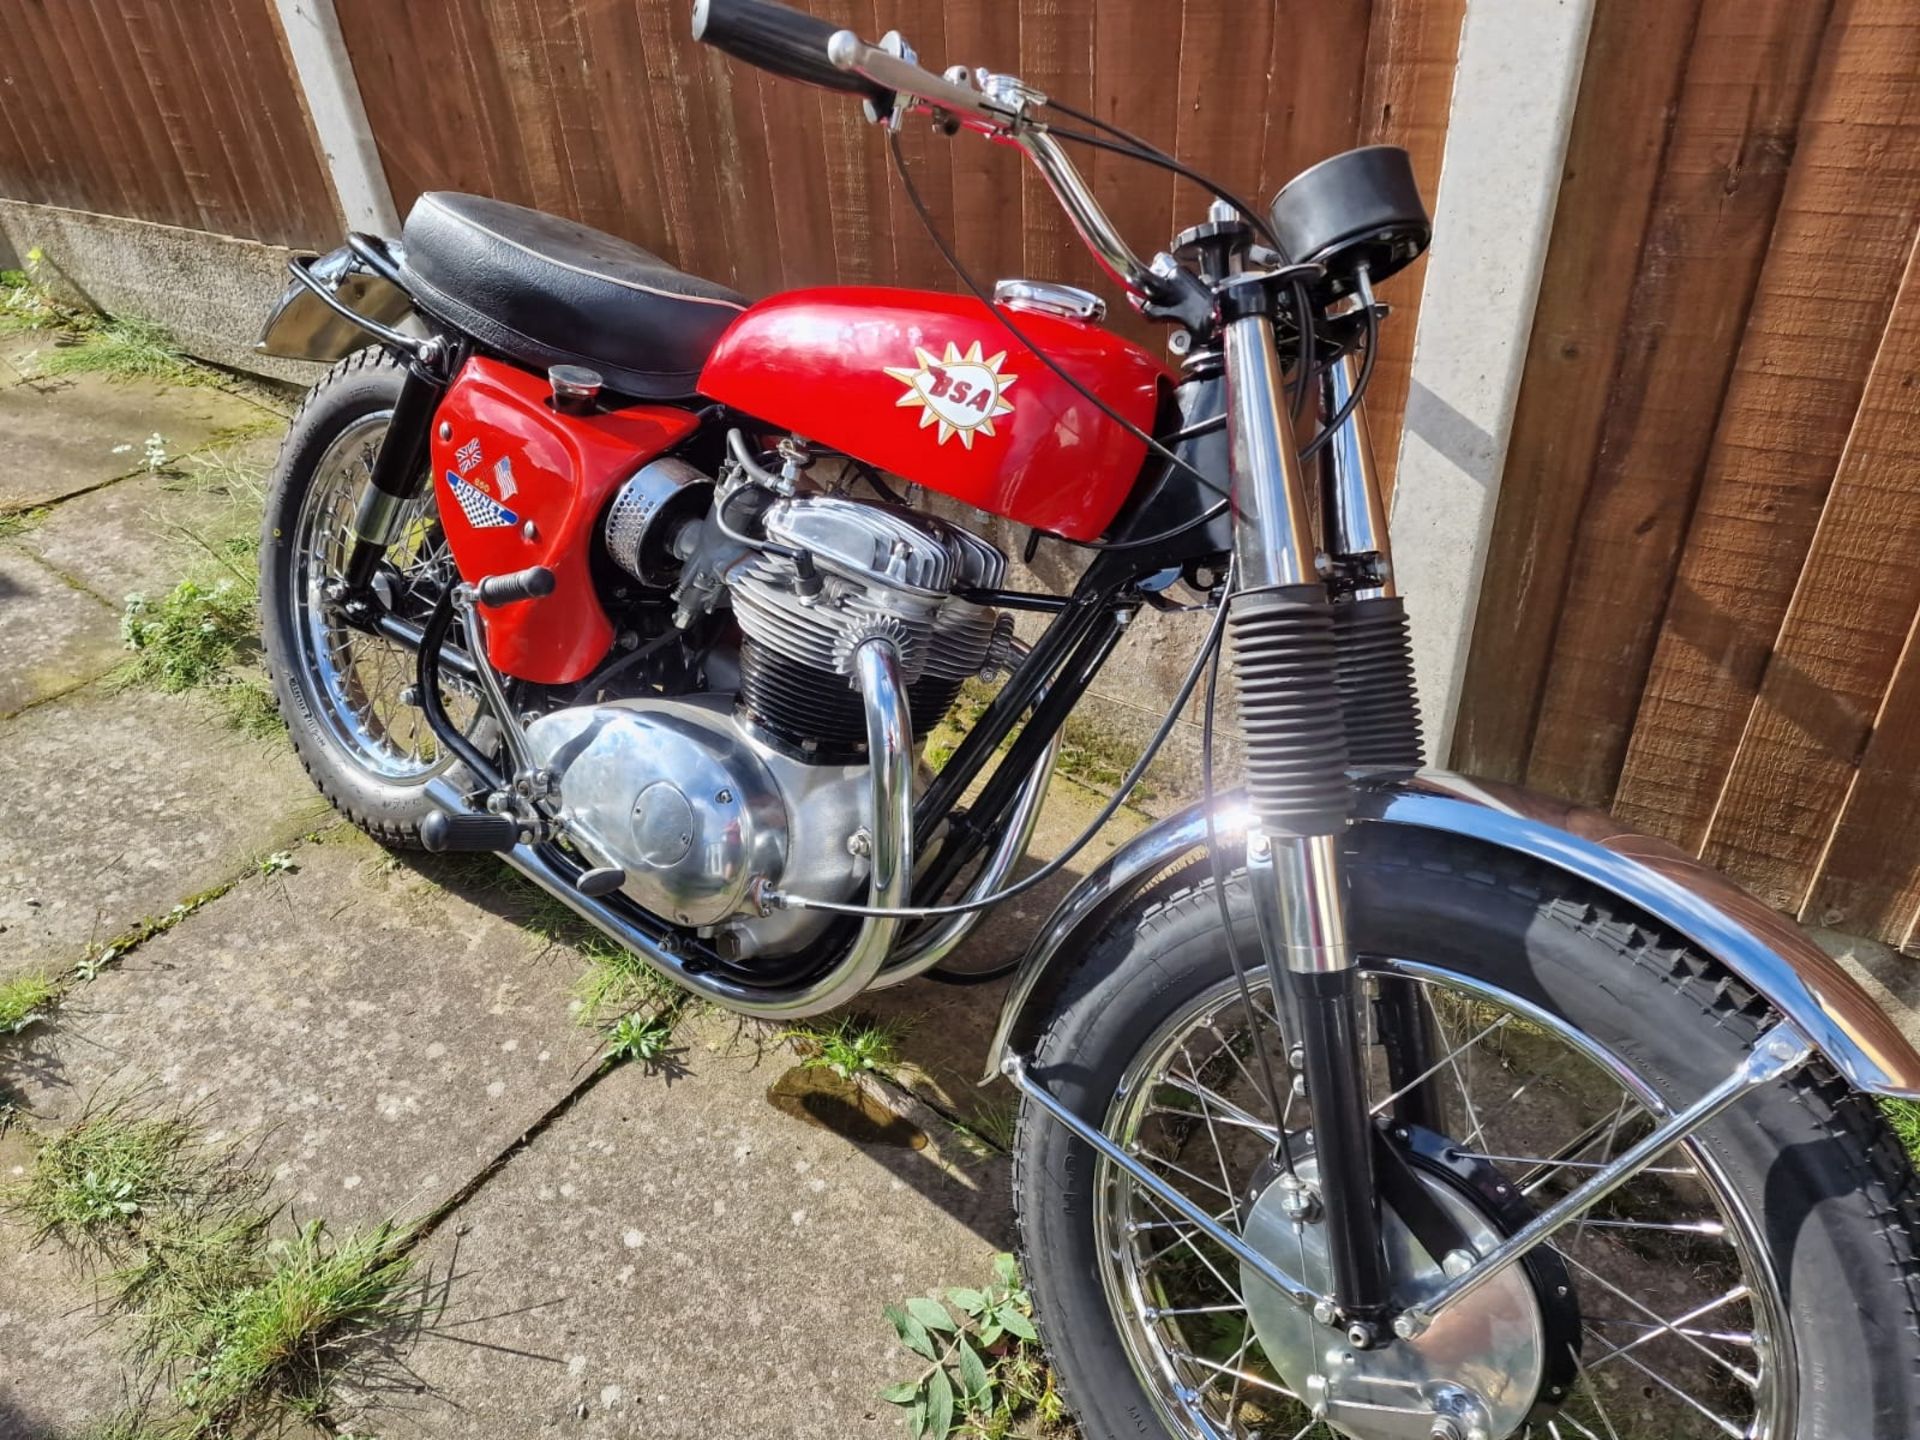 Bsa West Coast Hornet motorcycle. 1967. Recent restoration, very correct with WM3 front wheel, - Image 2 of 3